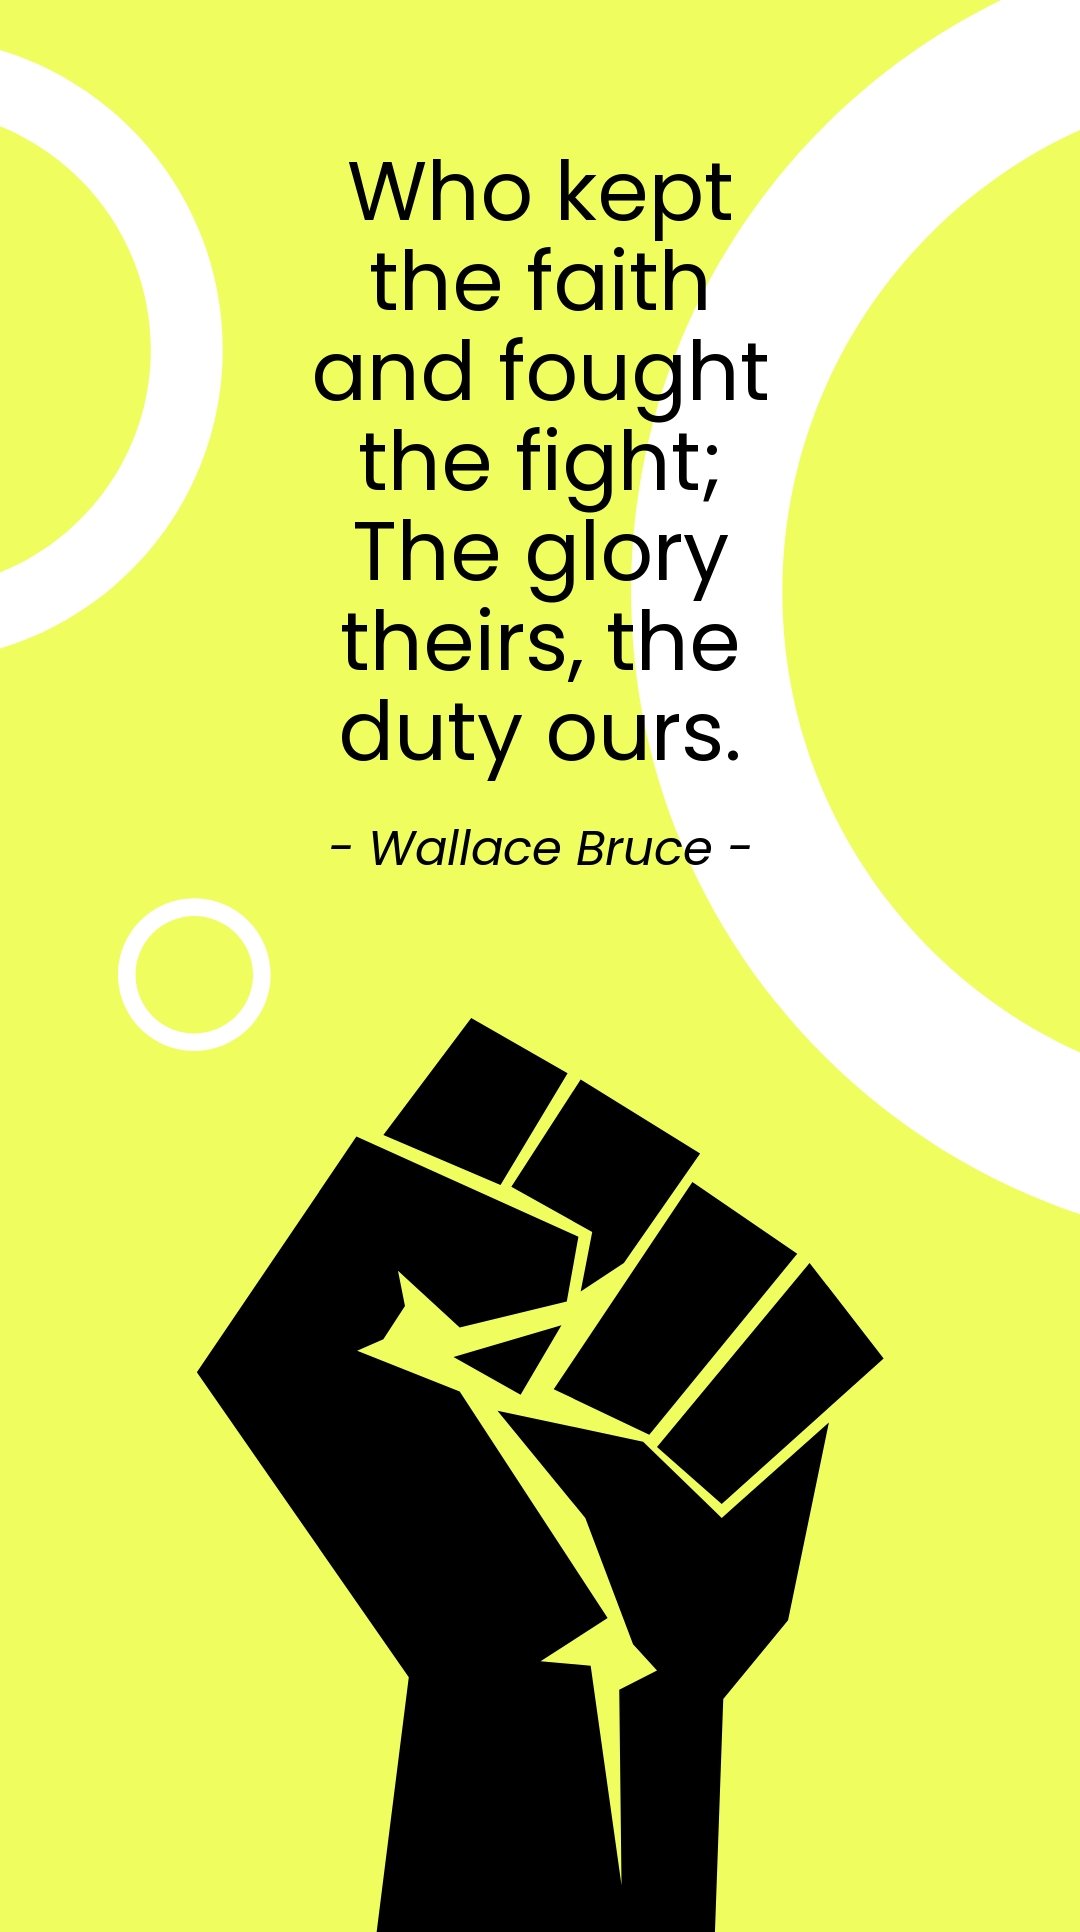 Wallace Bruce - "Who kept the faith and fought the fight; The glory theirs, the duty ours." in JPG